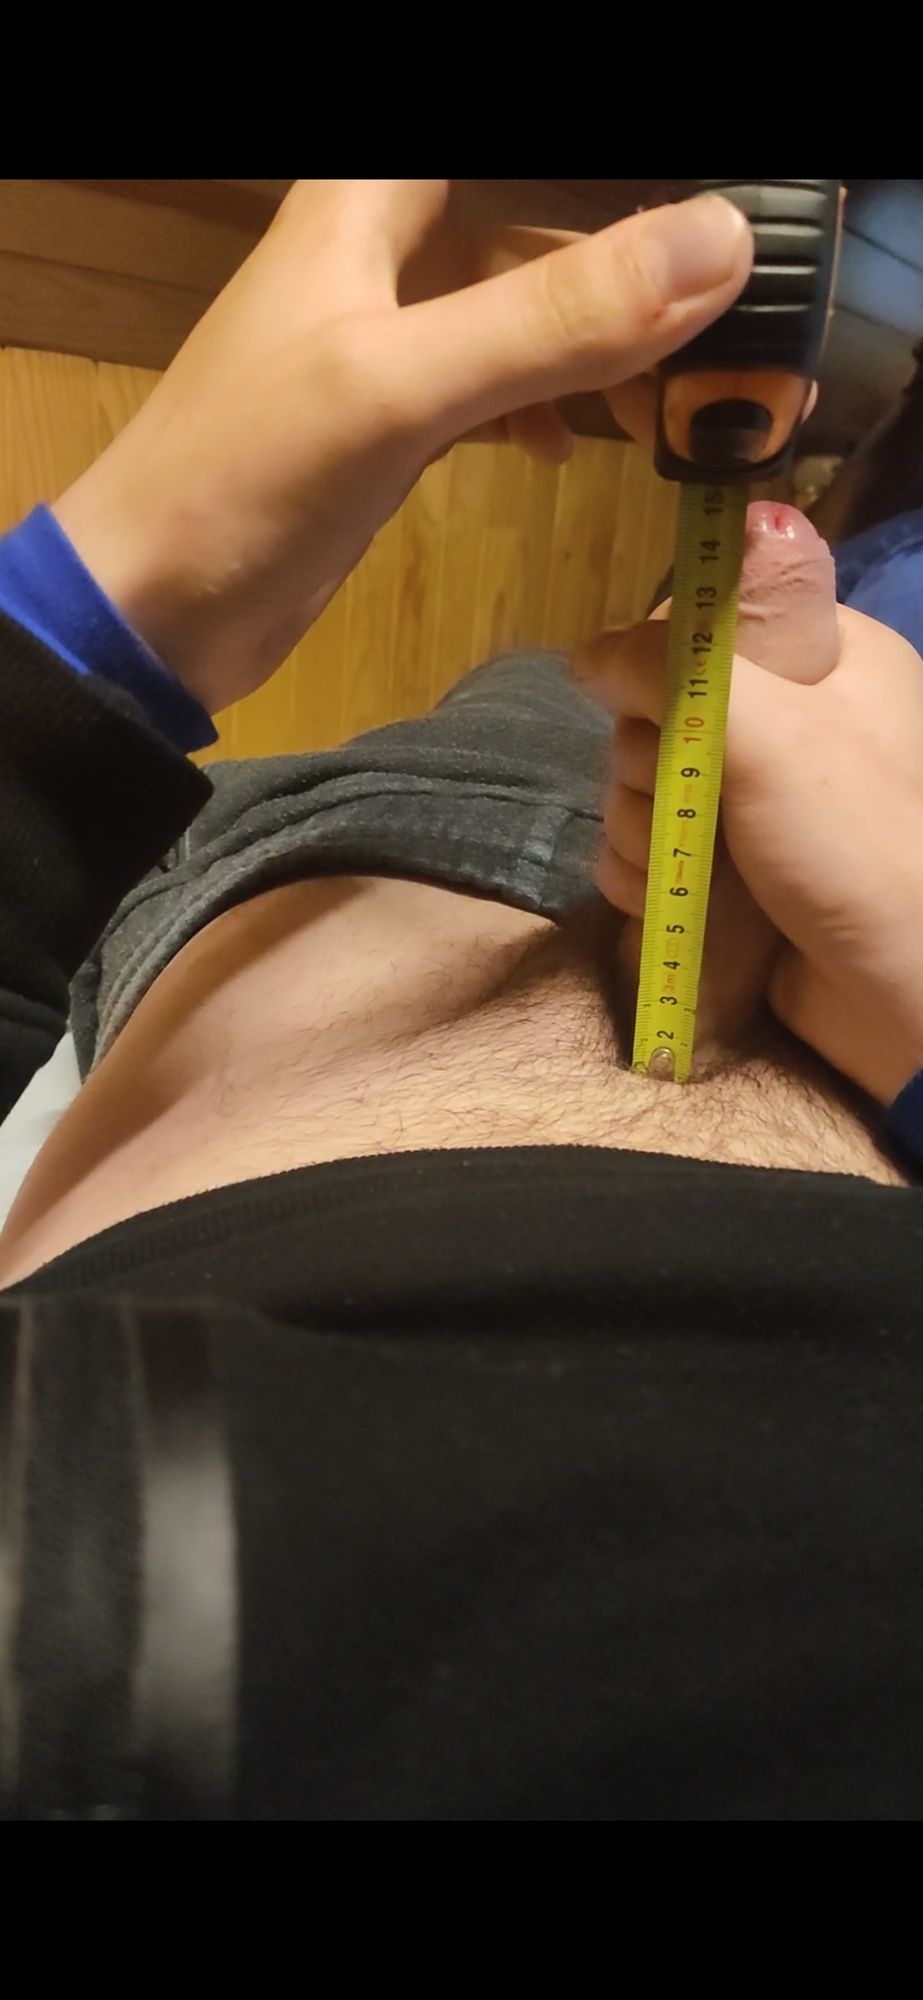 Tried to measure my cock (a little over 15cm max)